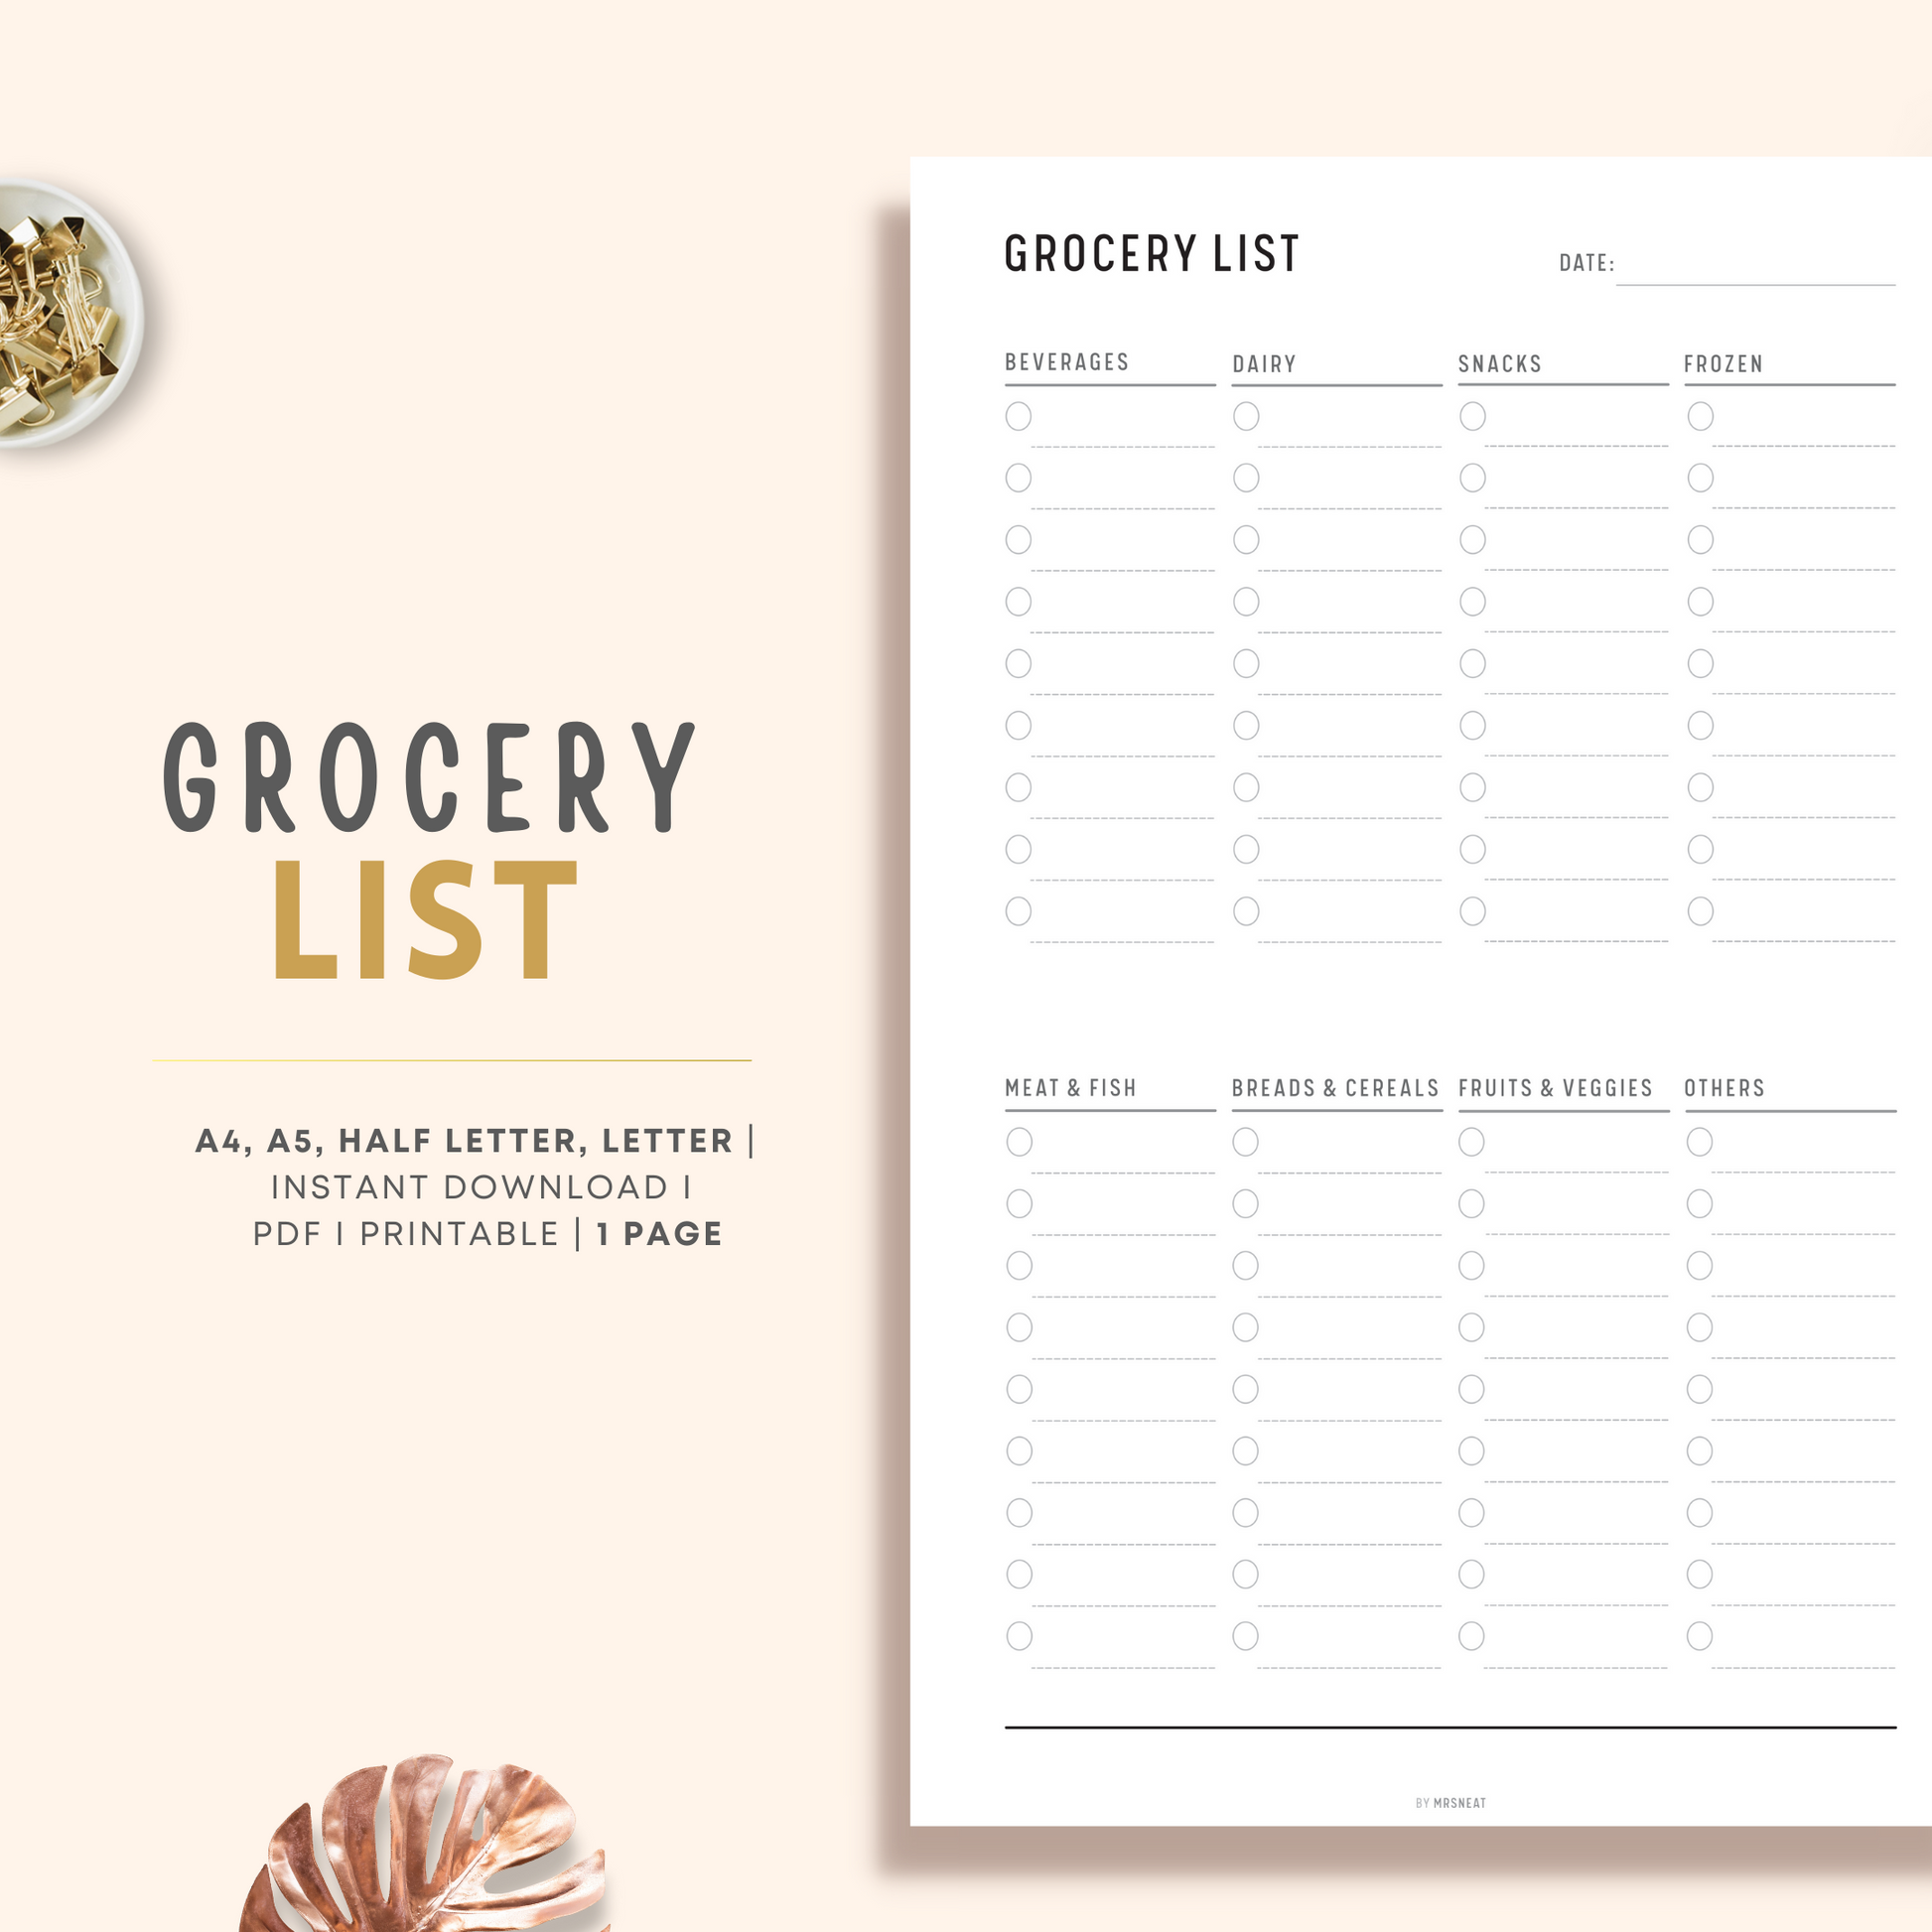 Minimalist and Clean Grocery List Planner with 8 shopping categories